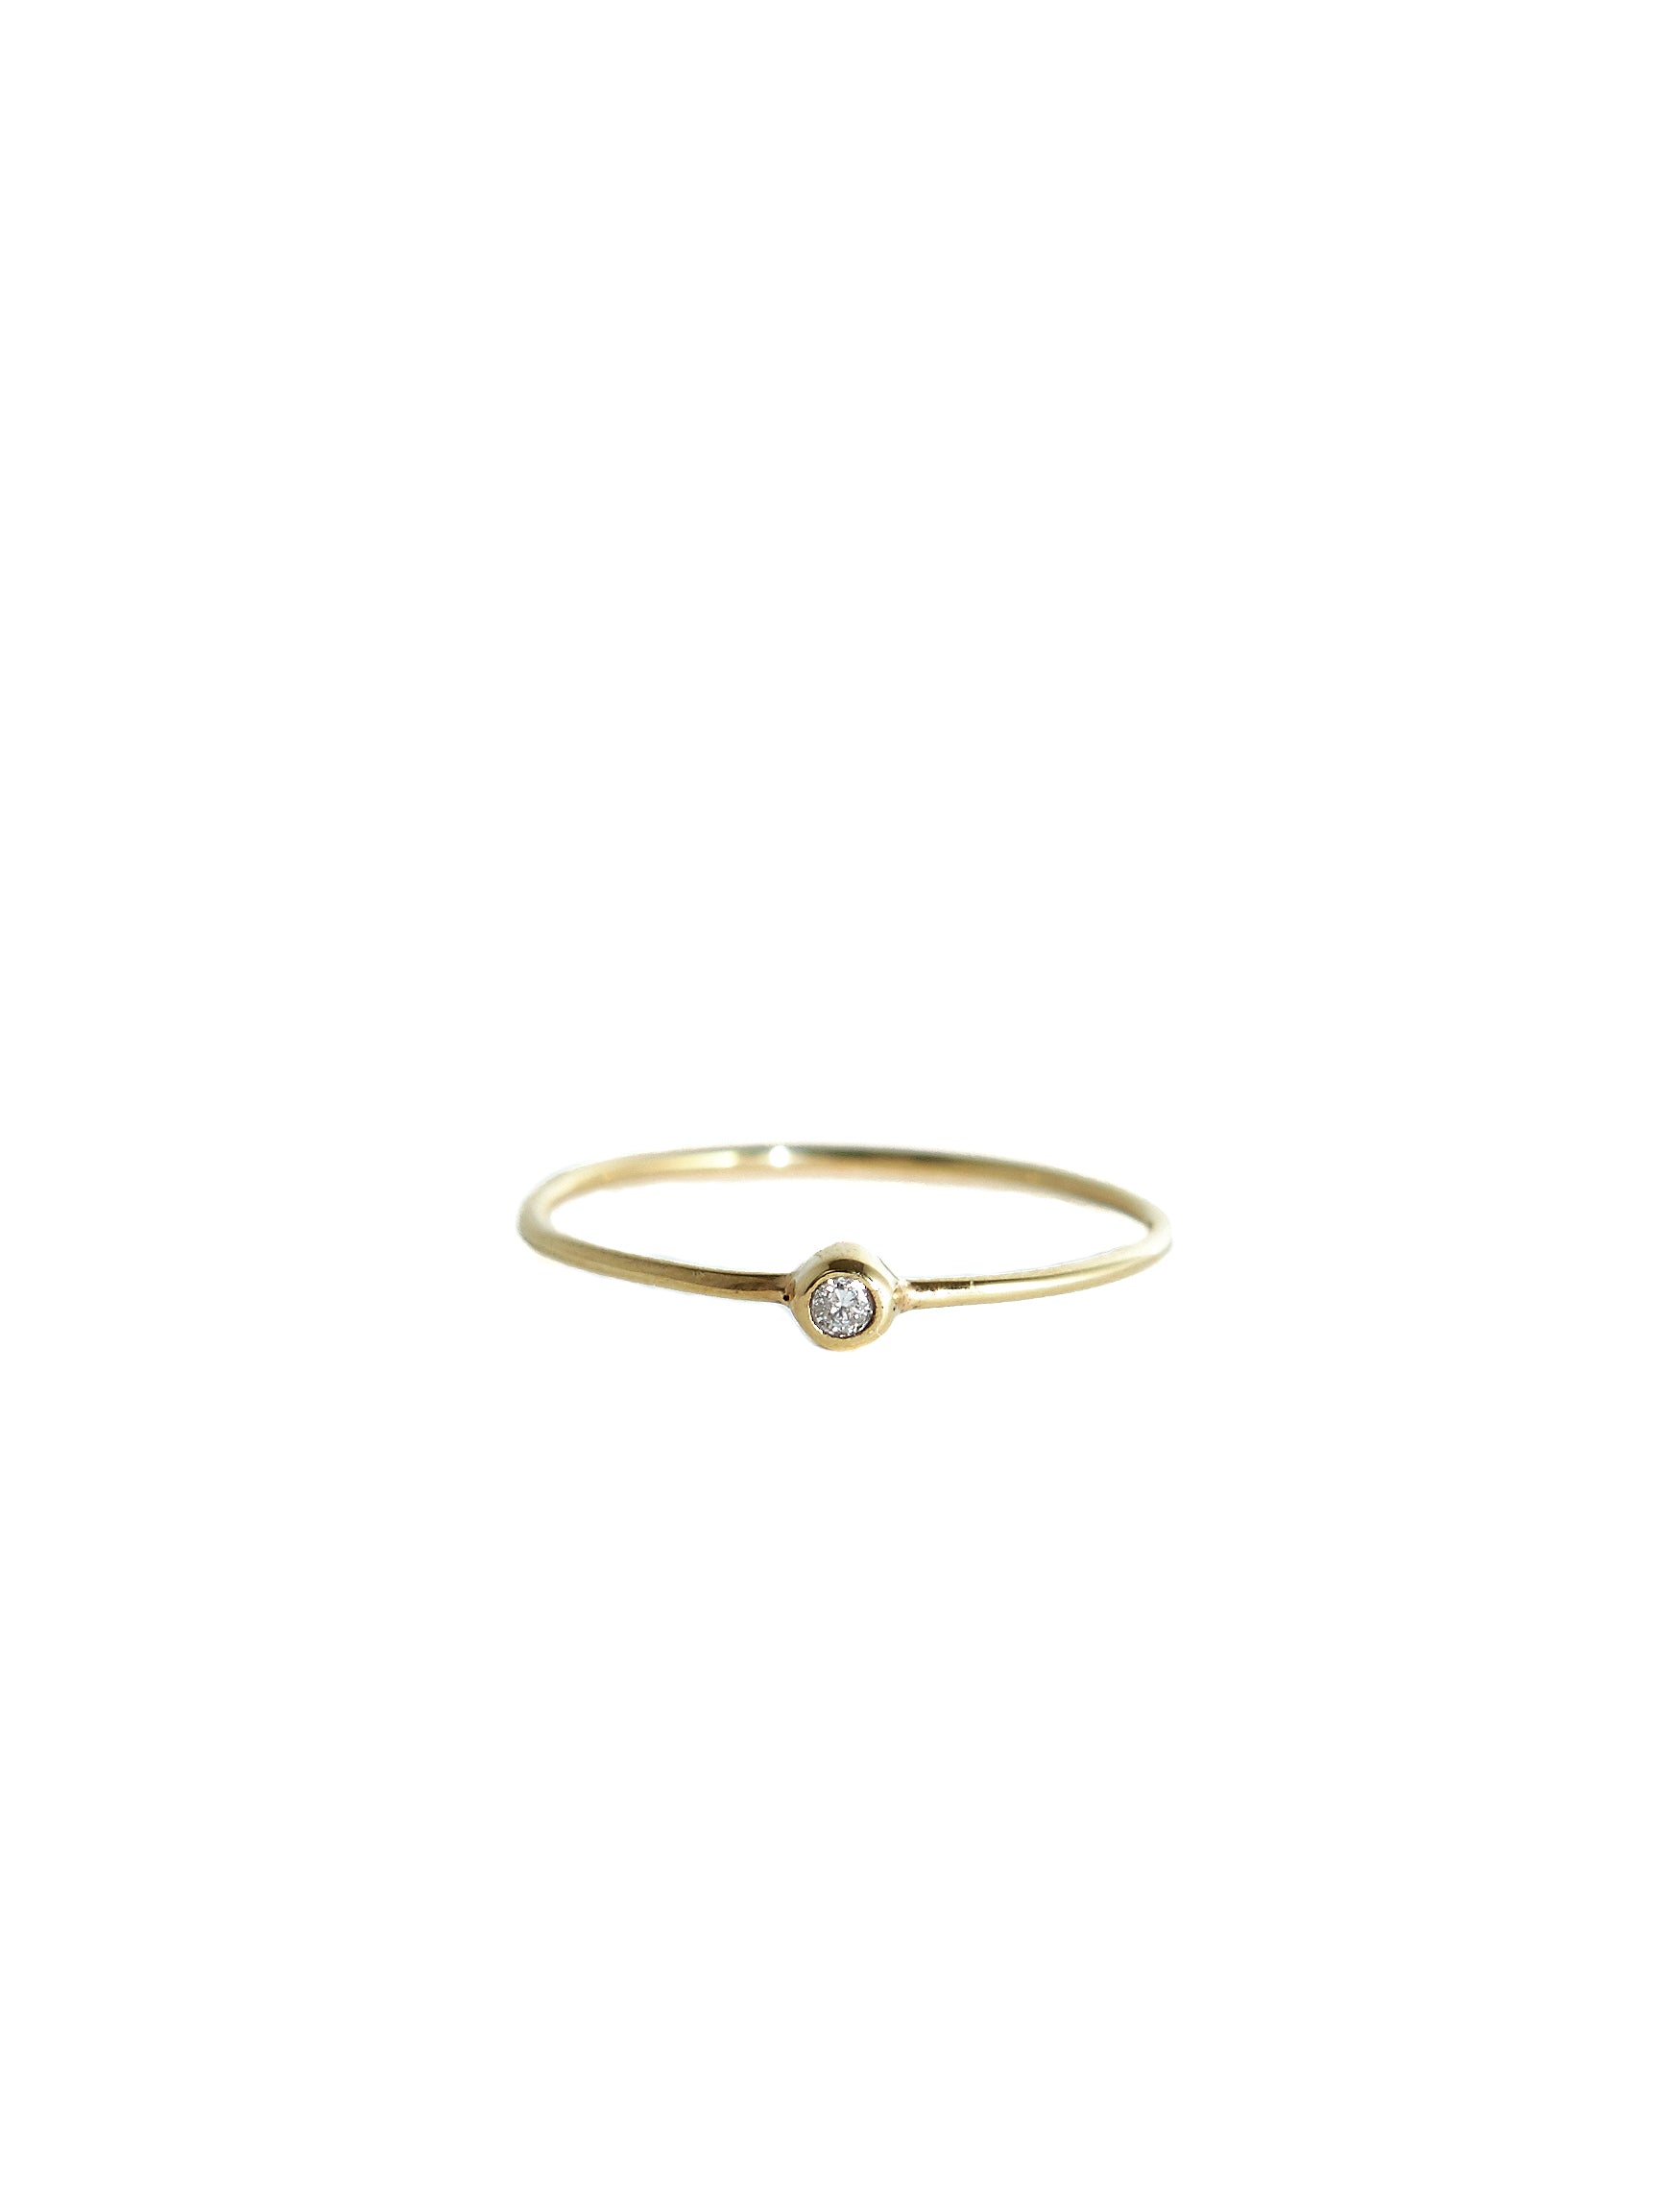 Petite Pierre Blanche Ring Gold